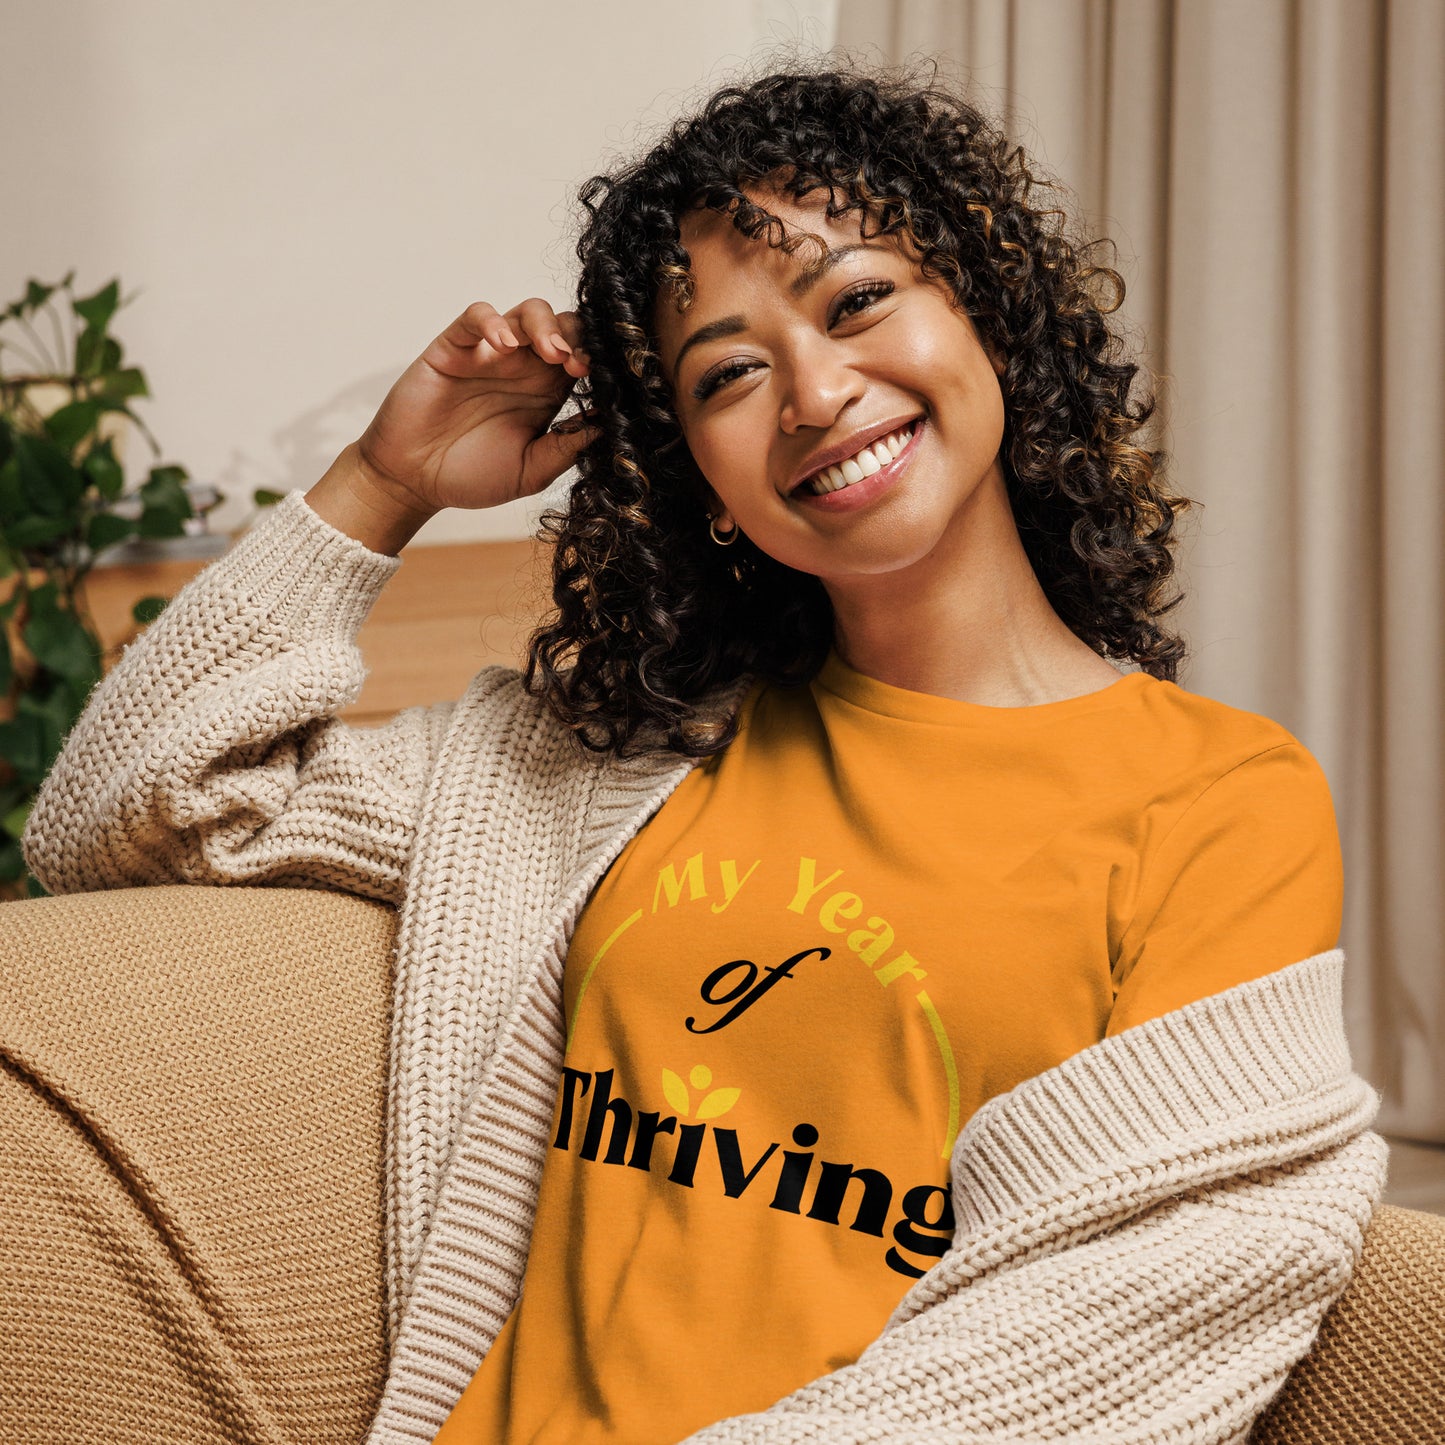 Women's 'My Year of Thriving' Relaxed T-Shirt